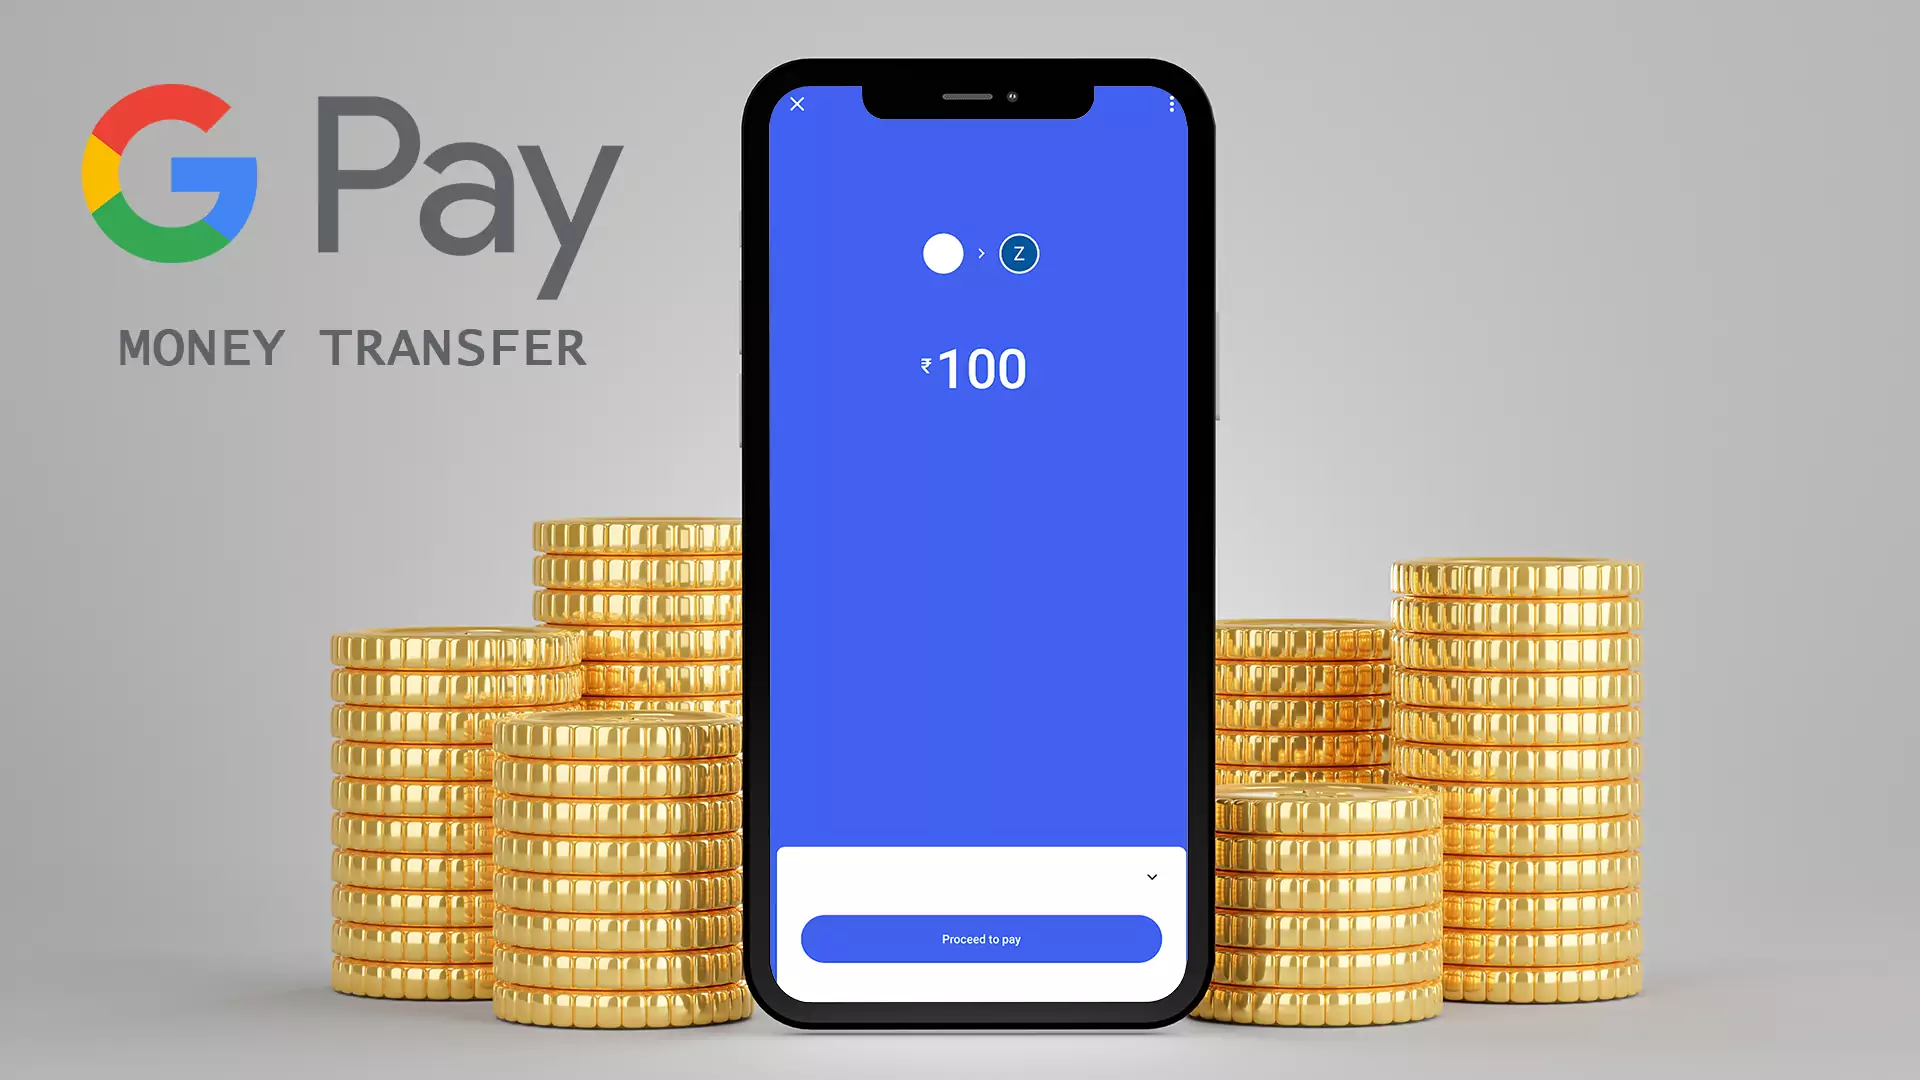 You can transfer money using Google Pay from your bank accounts to betting accounts.